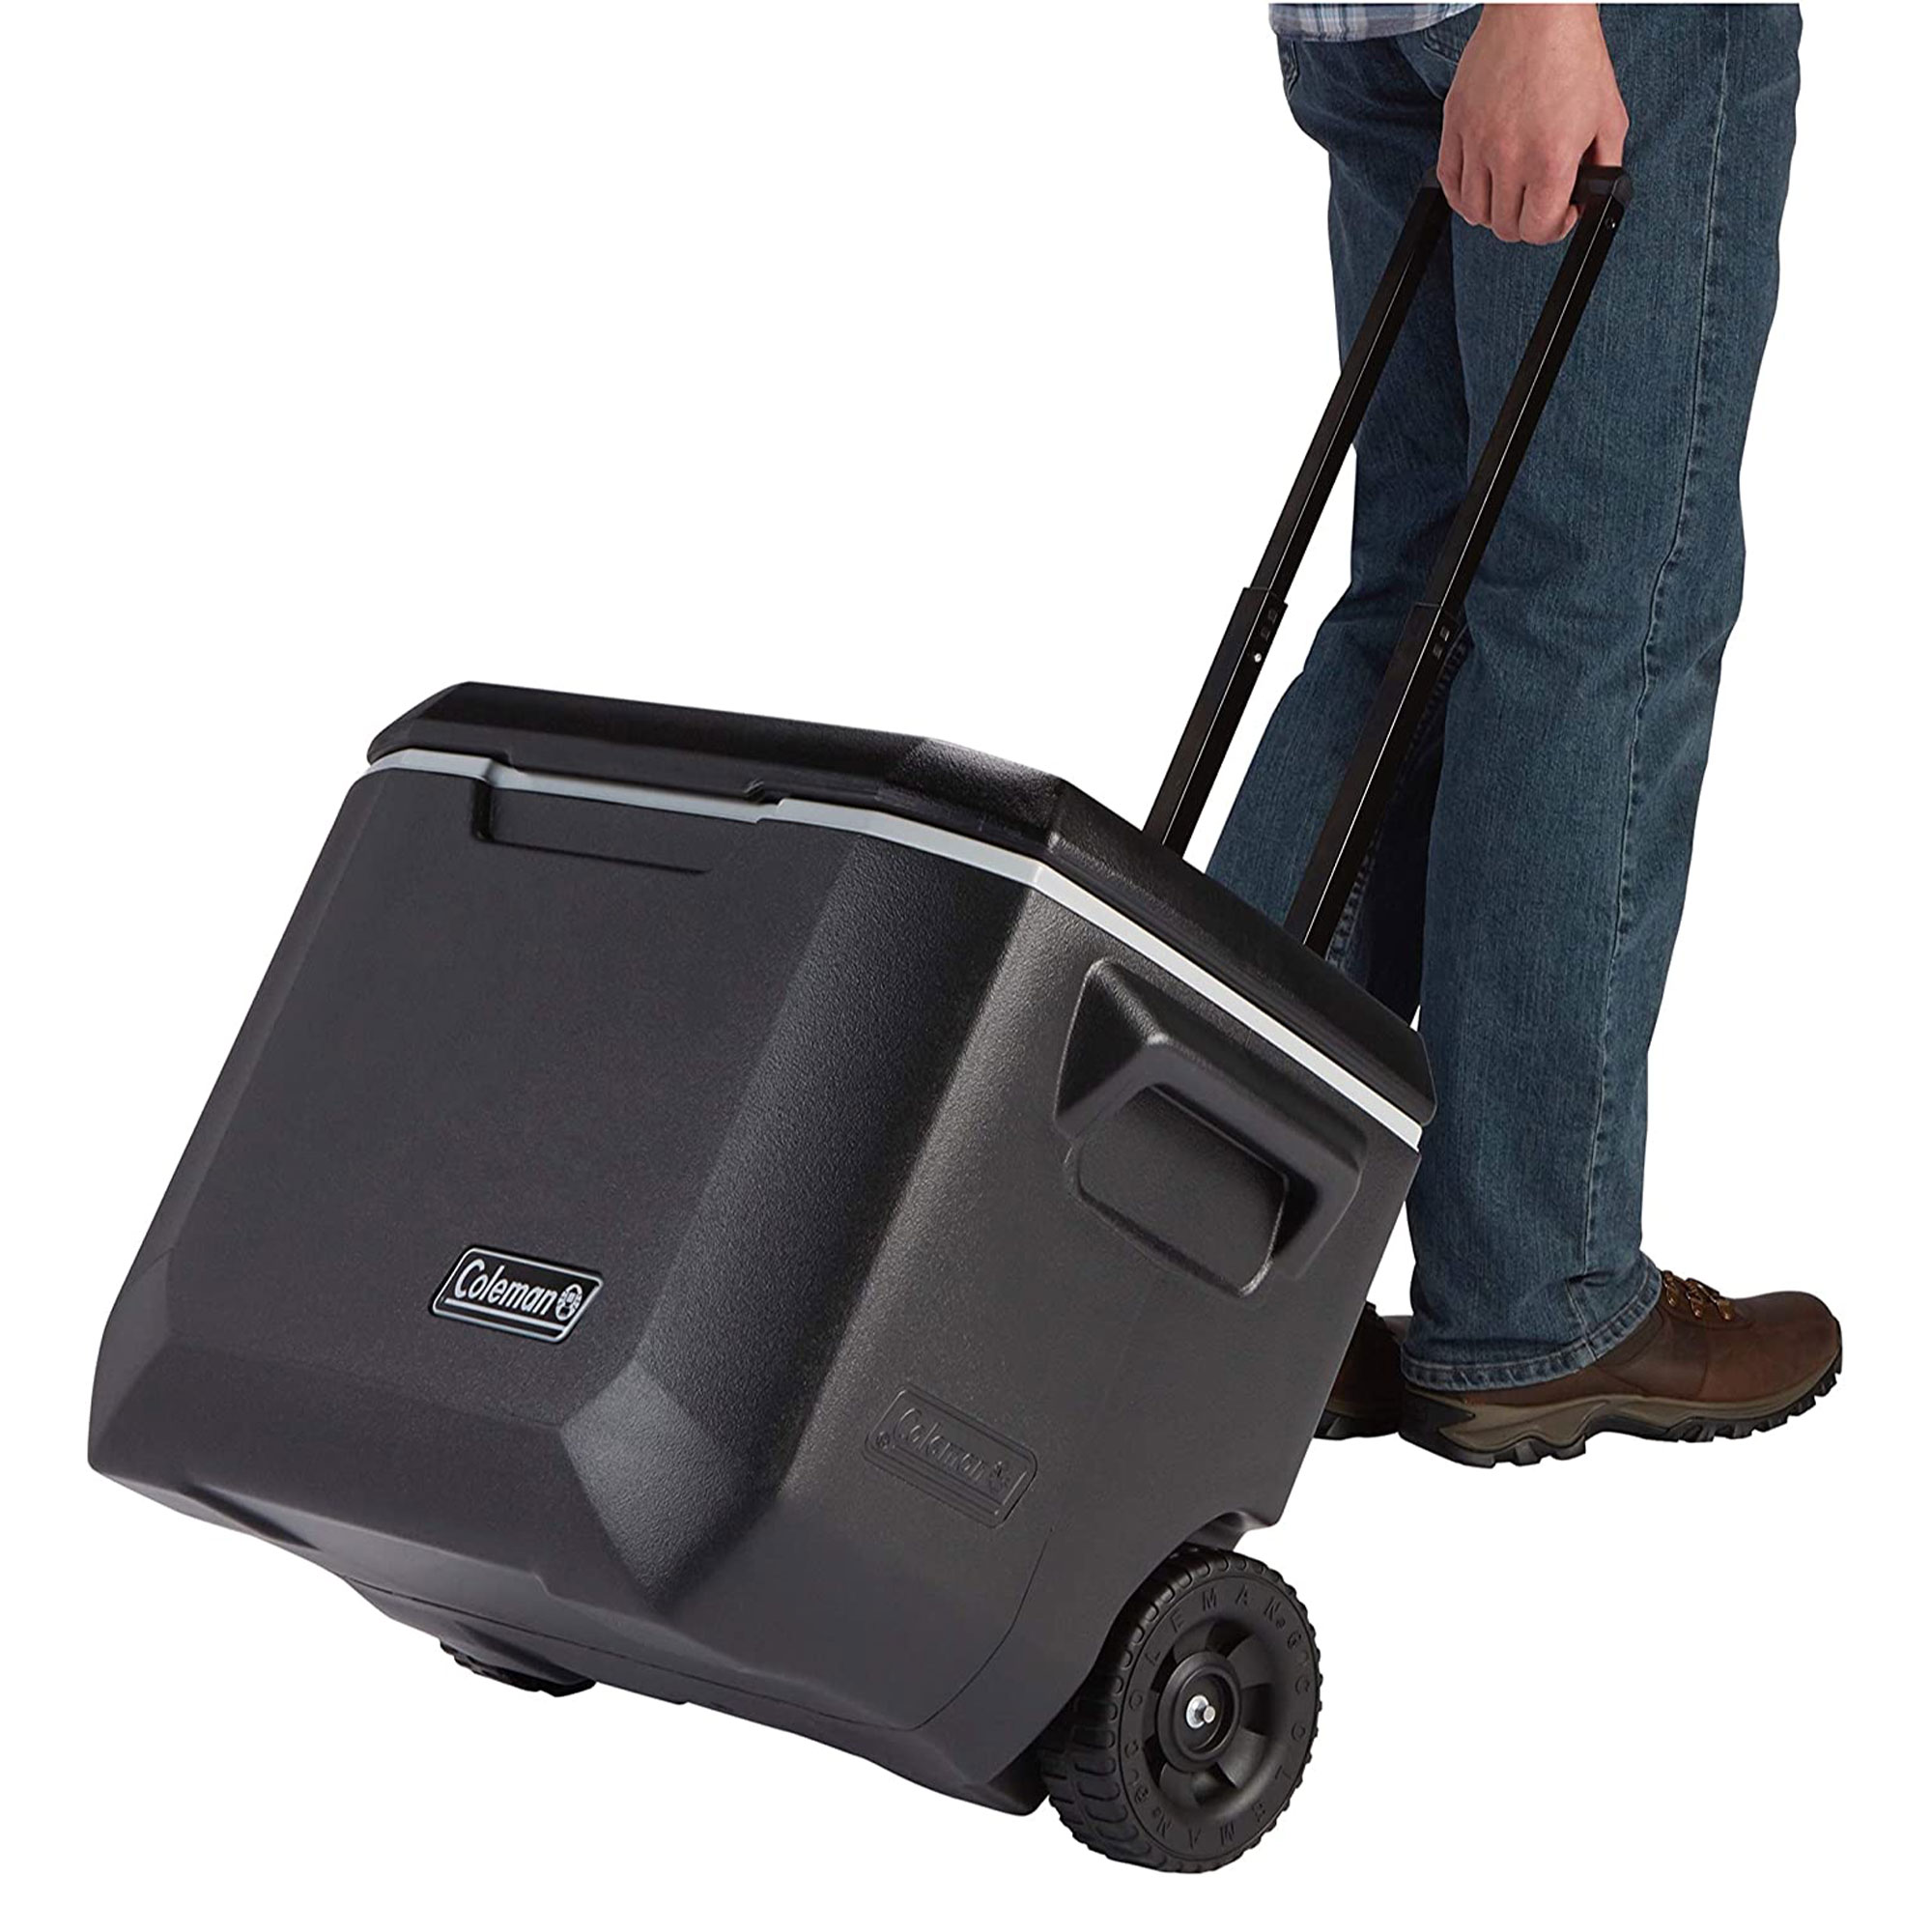 Coleman Xtreme 50 Quart 5-Day Hard Cooler With Wheels And